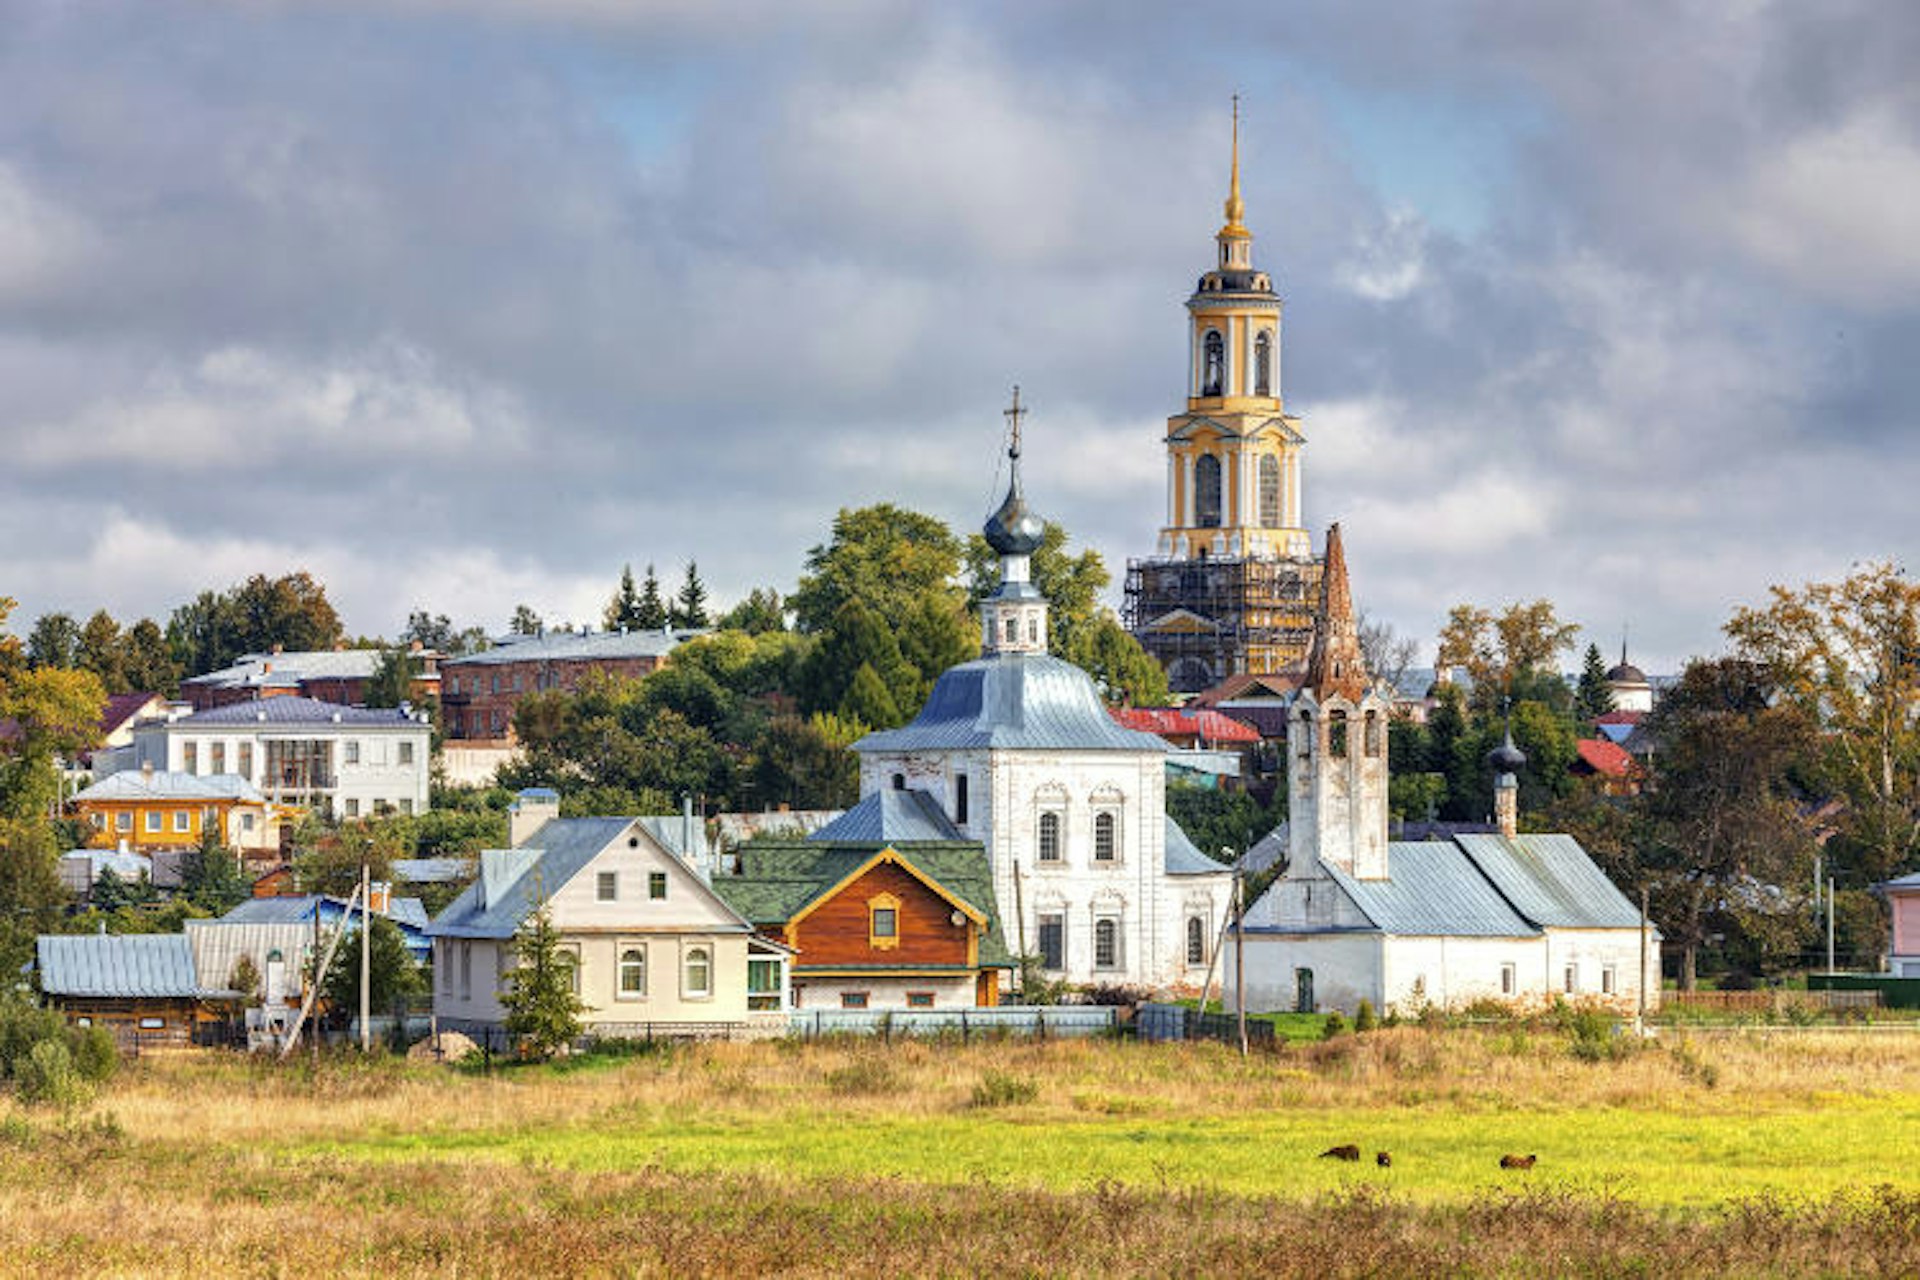 Idyllic cityscape of Suzdal, the jewel of the Golden Ring. Image by Laures / iStock / Getty Images